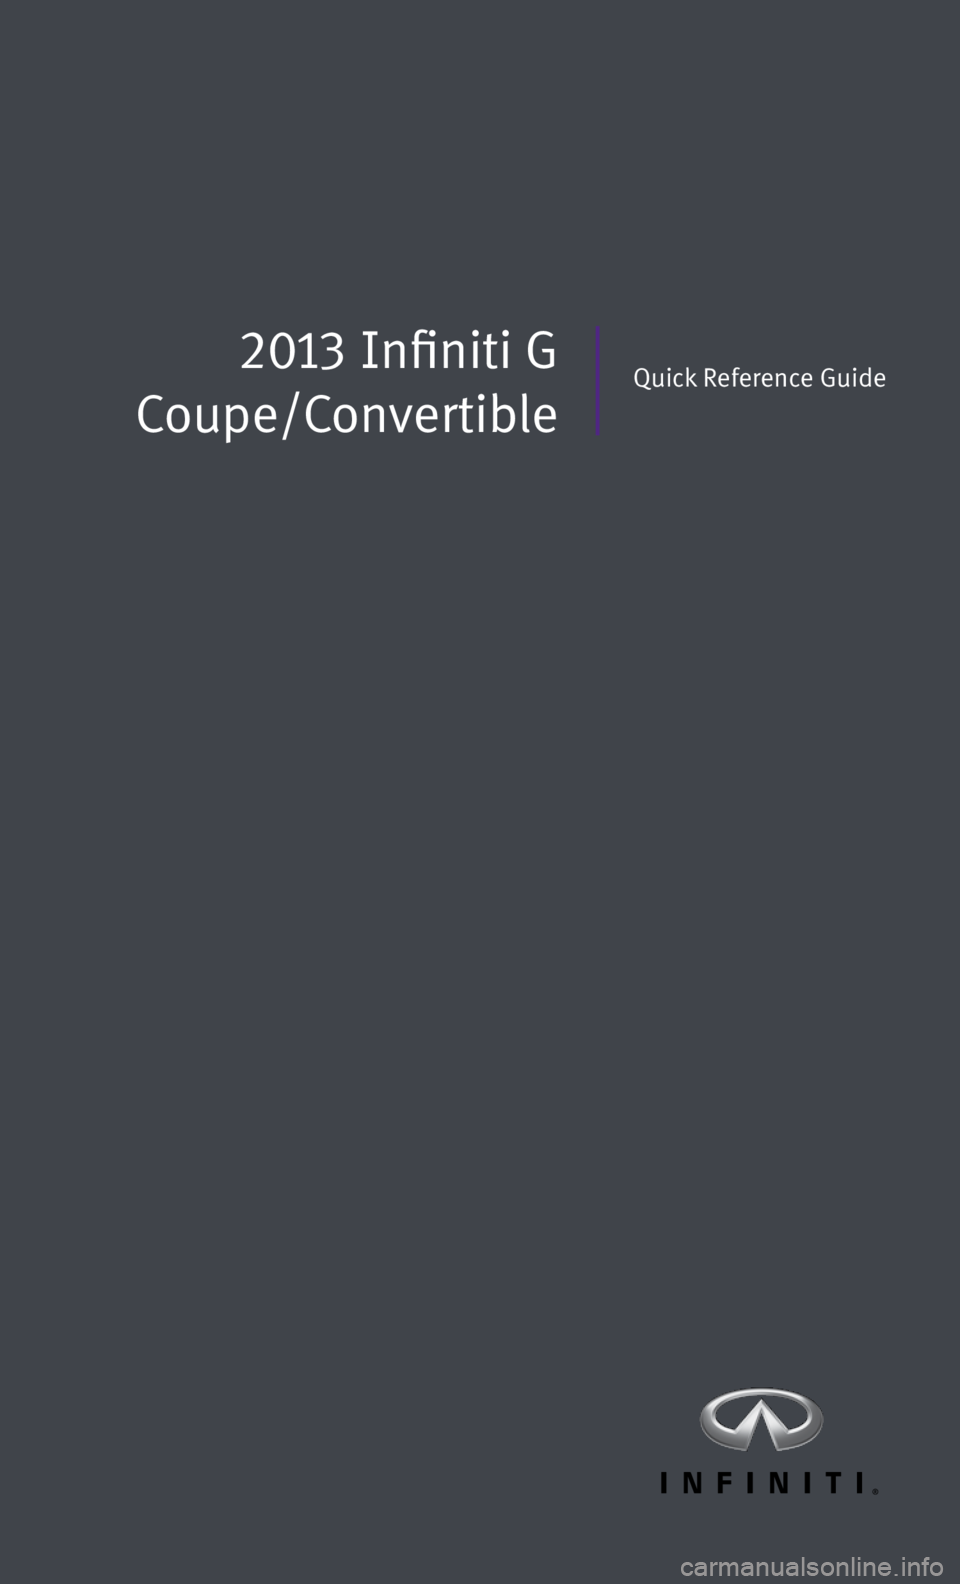 INFINITI G CONVERTIBLE 2013  Quick Reference Guide Quick Reference Guide2013 Infiniti G 
Coupe/Convertible 